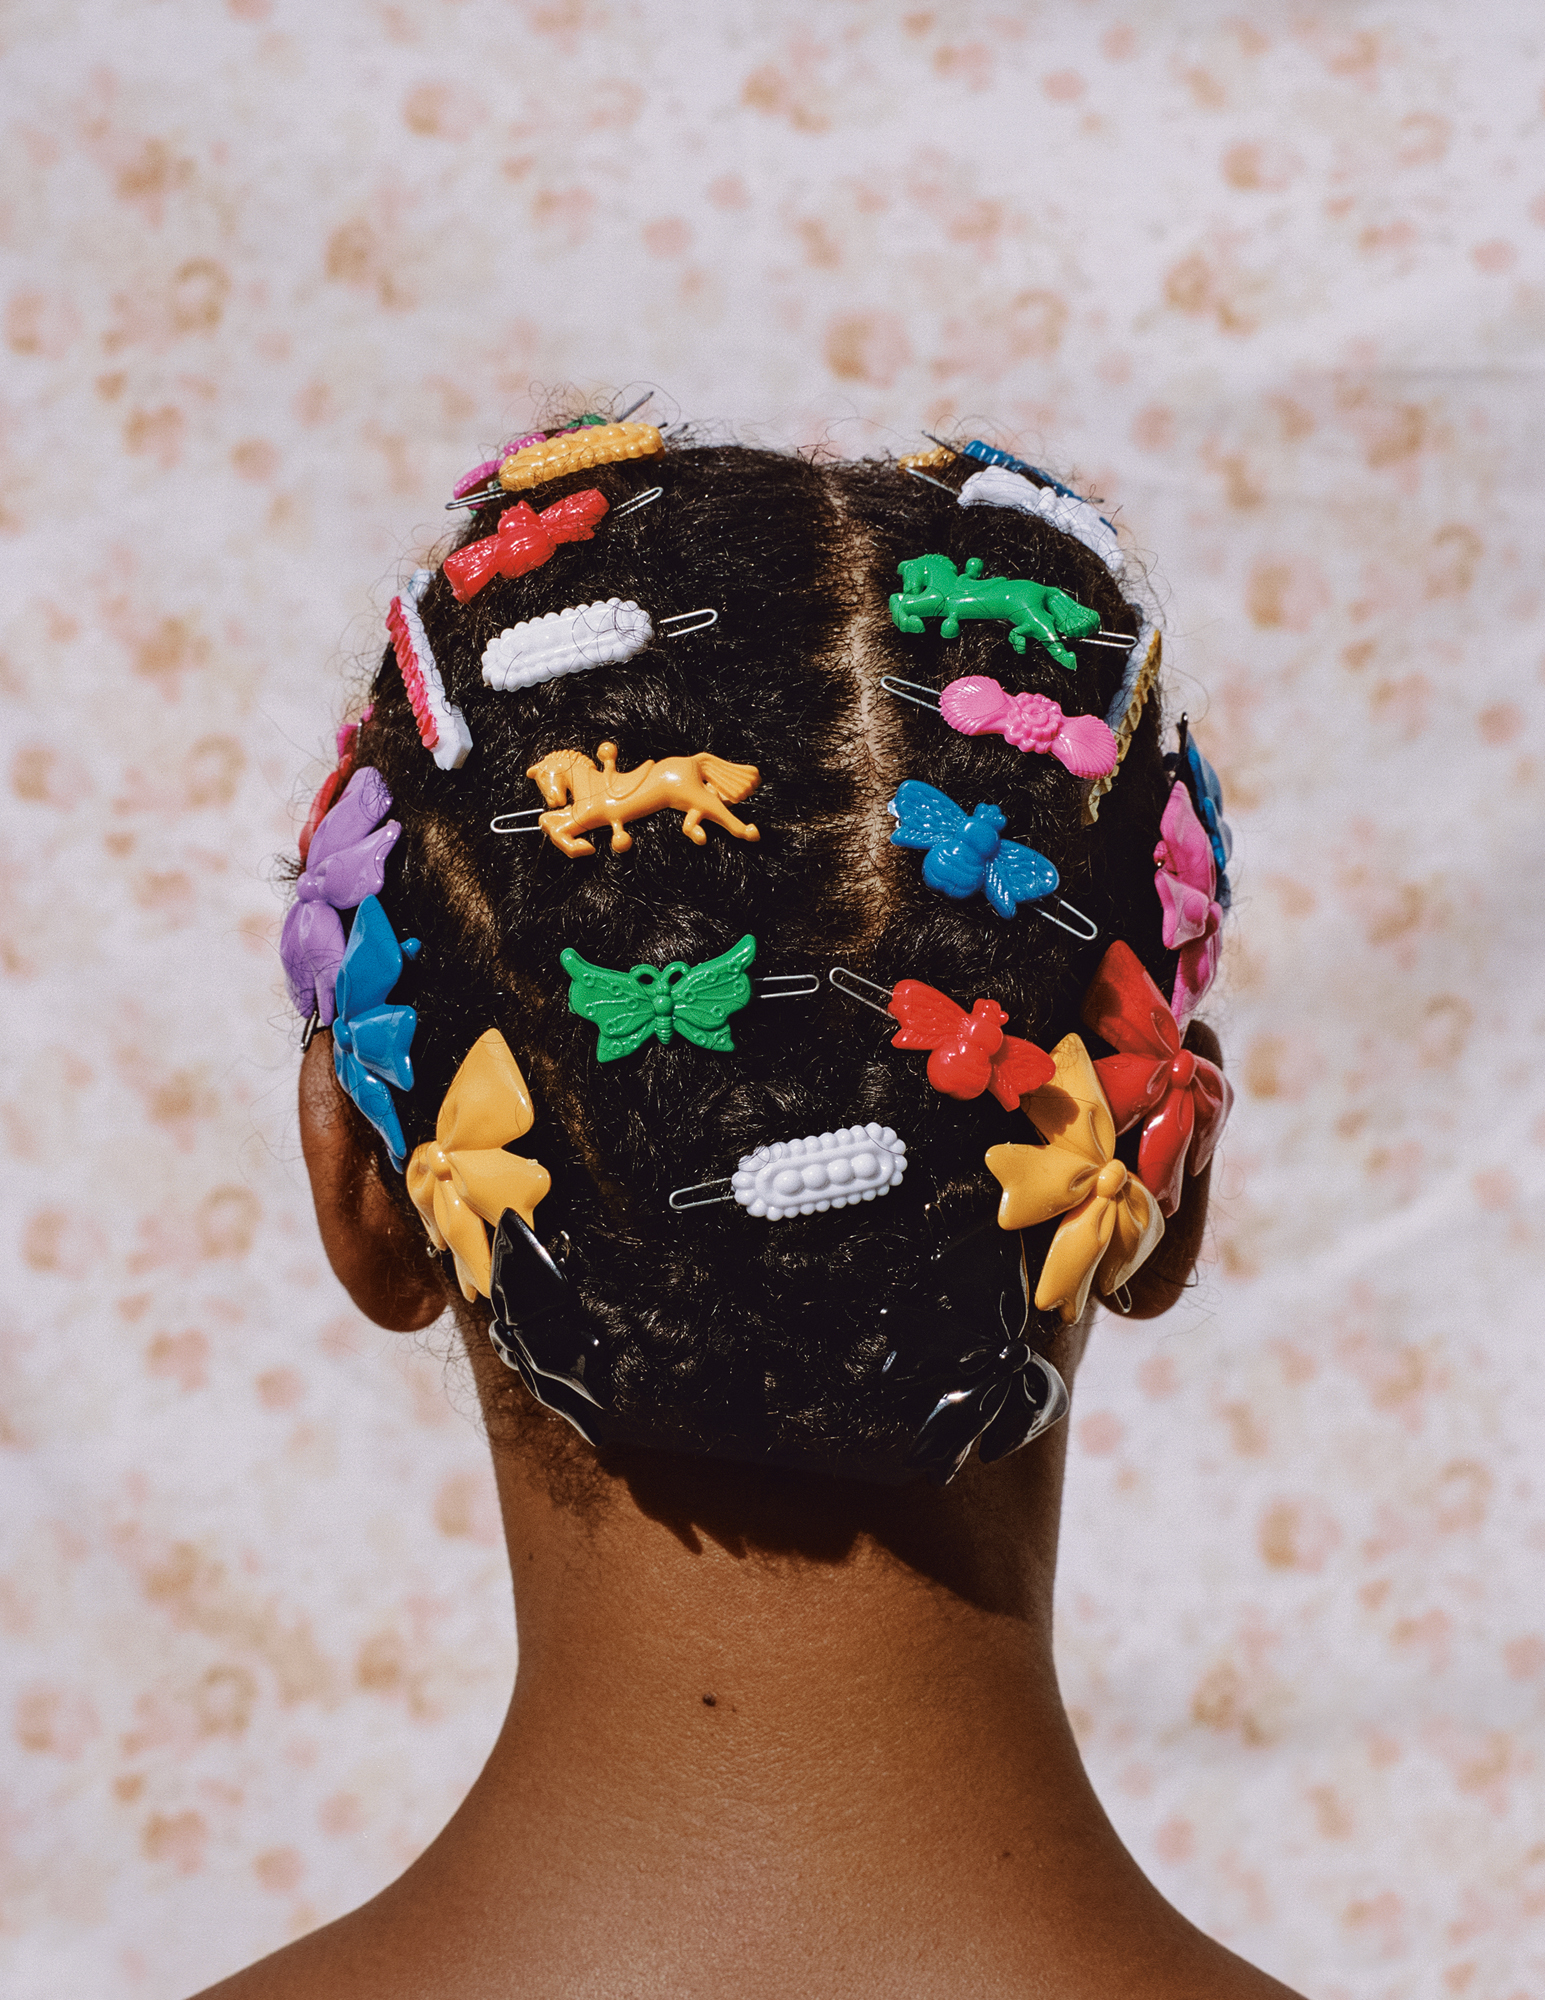 The Wick -  Micaiah Carter, Adeline in Barrettes, 2018, from The New Black Vanguard (Aperture, 2019). © Micaiah Carter